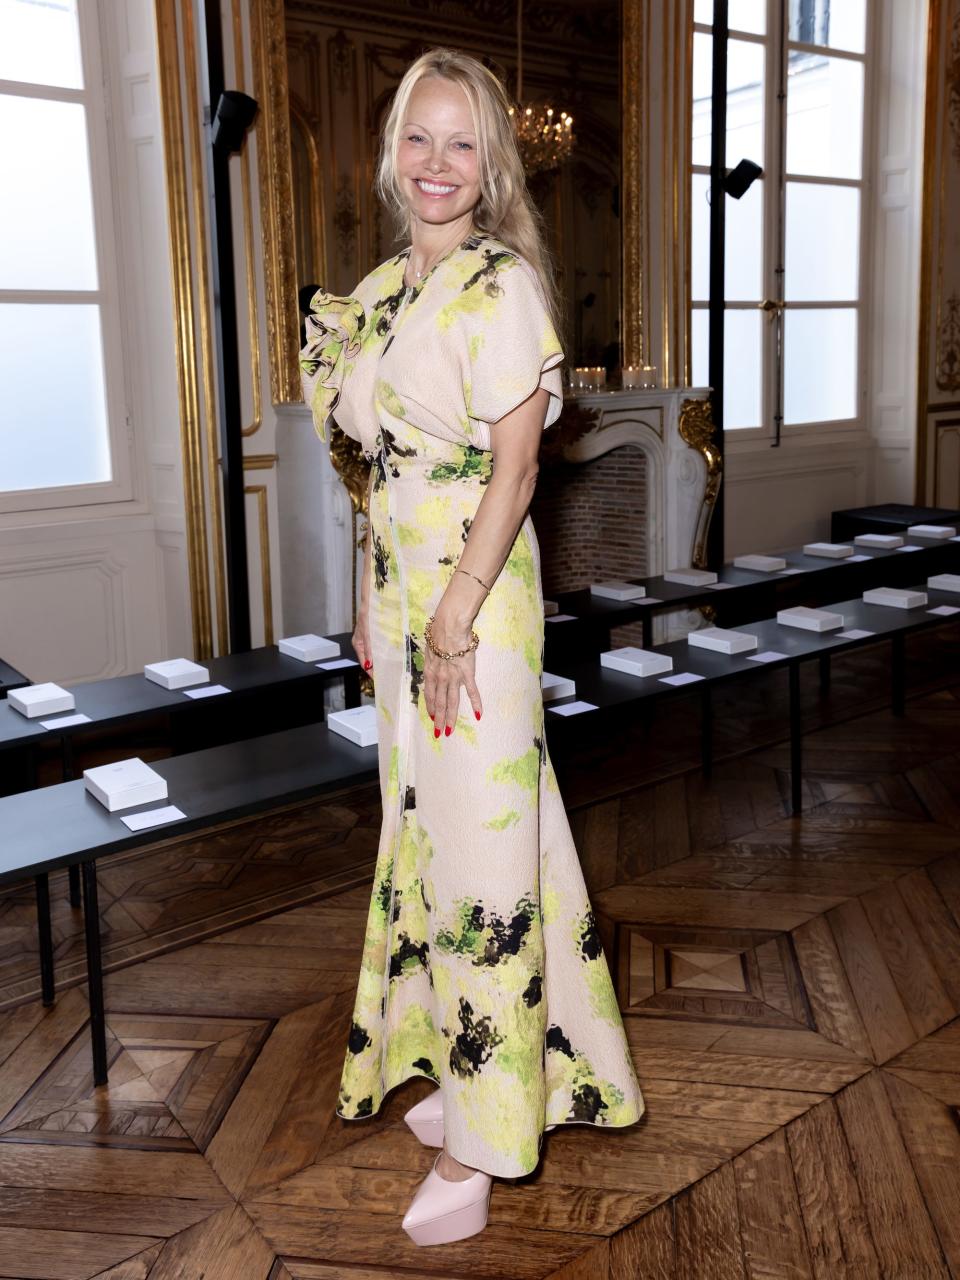 Pamela Anderson went makeup-free at Paris Fashion Week and stole the show